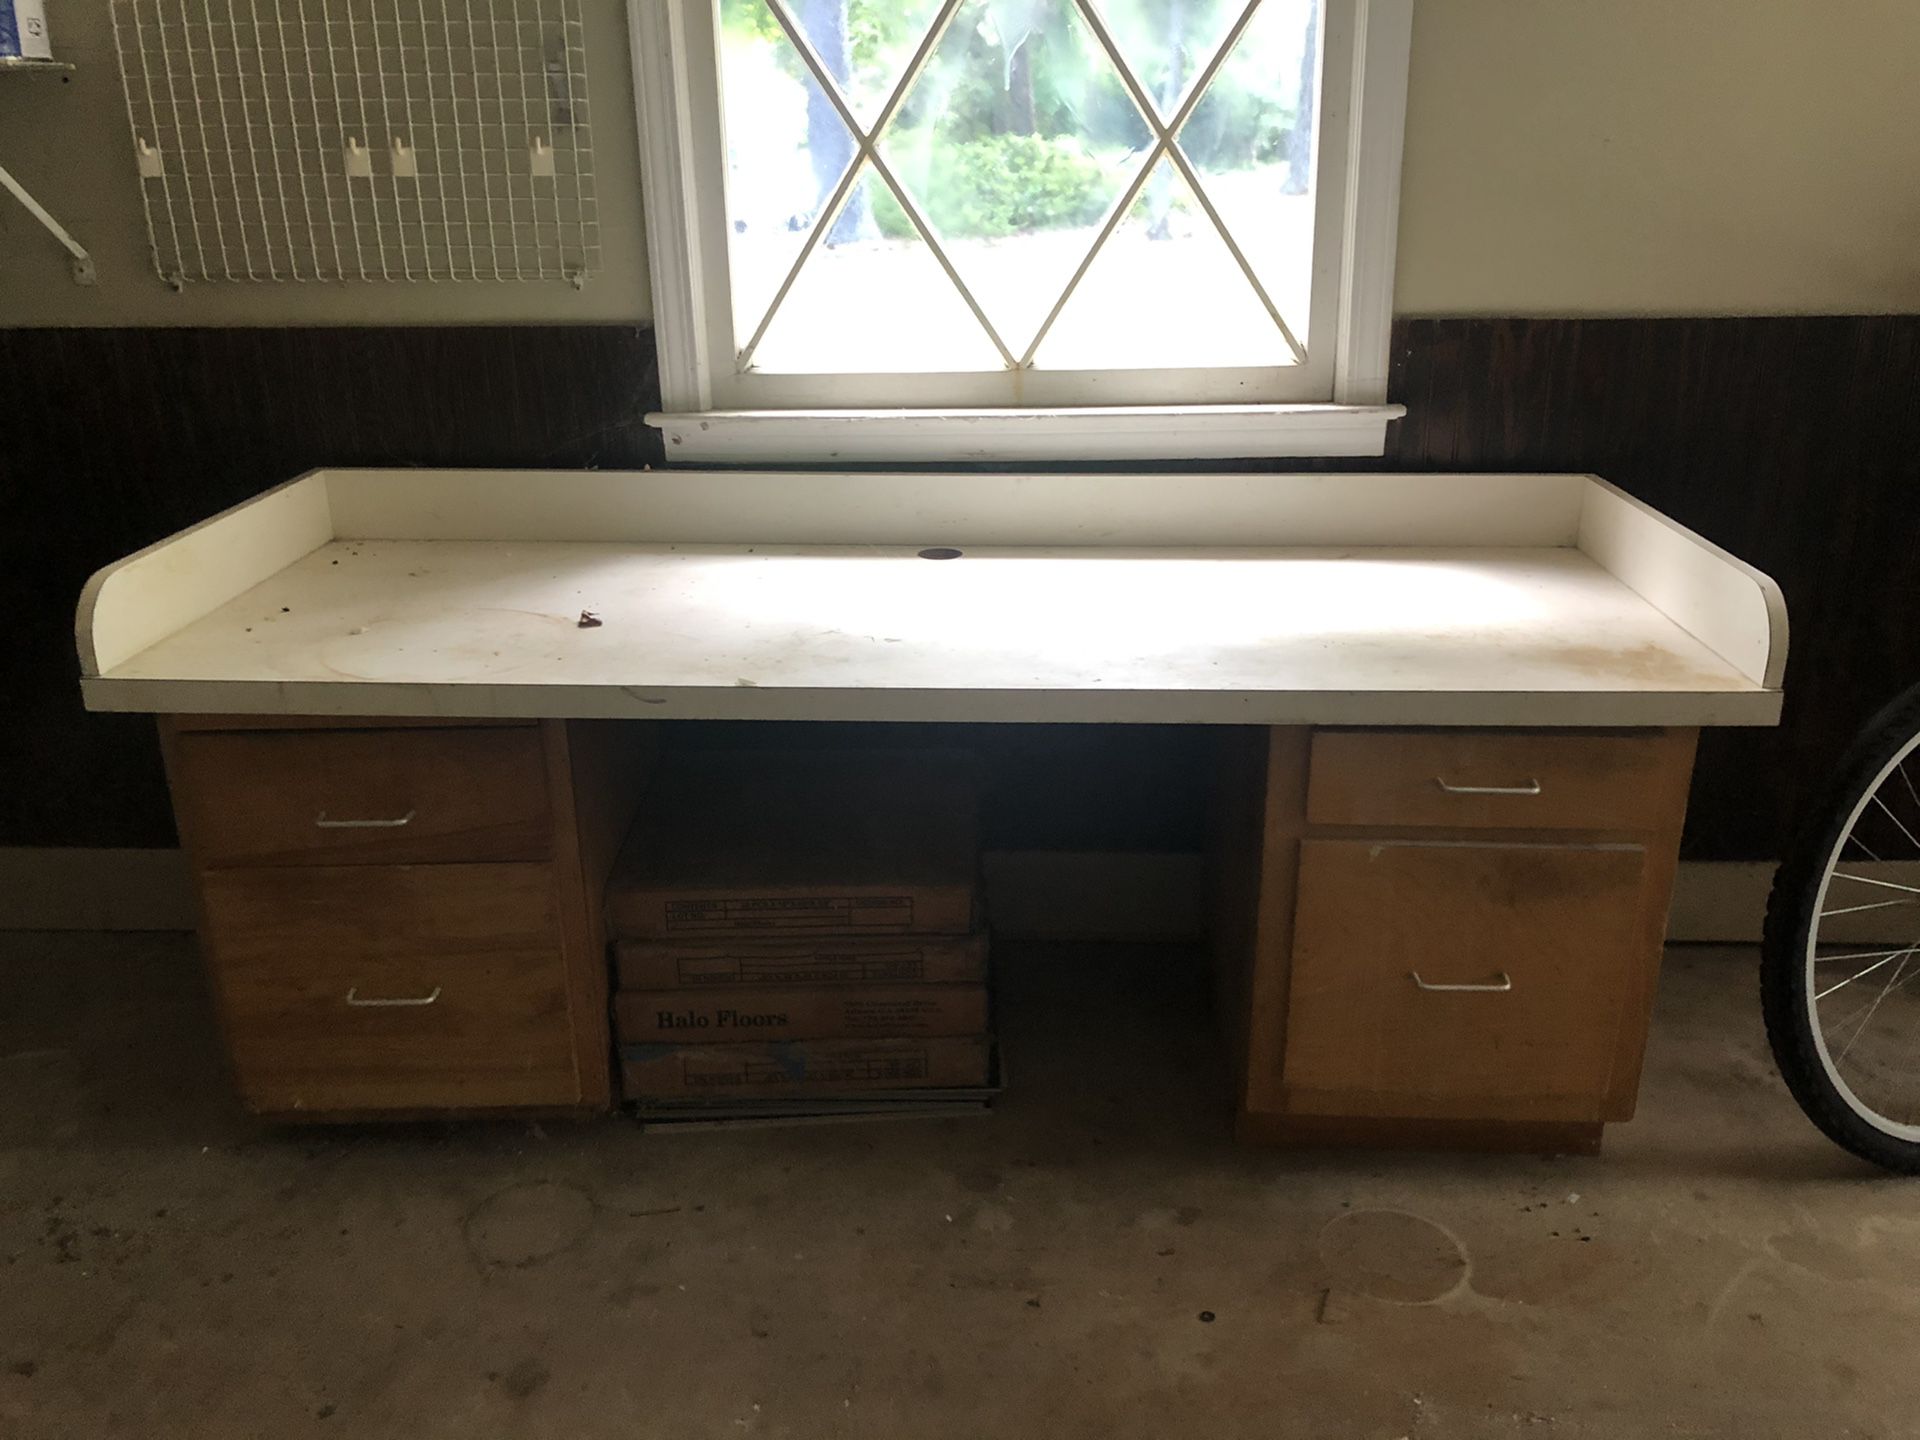 FREE bathroom and kitchen cabinets